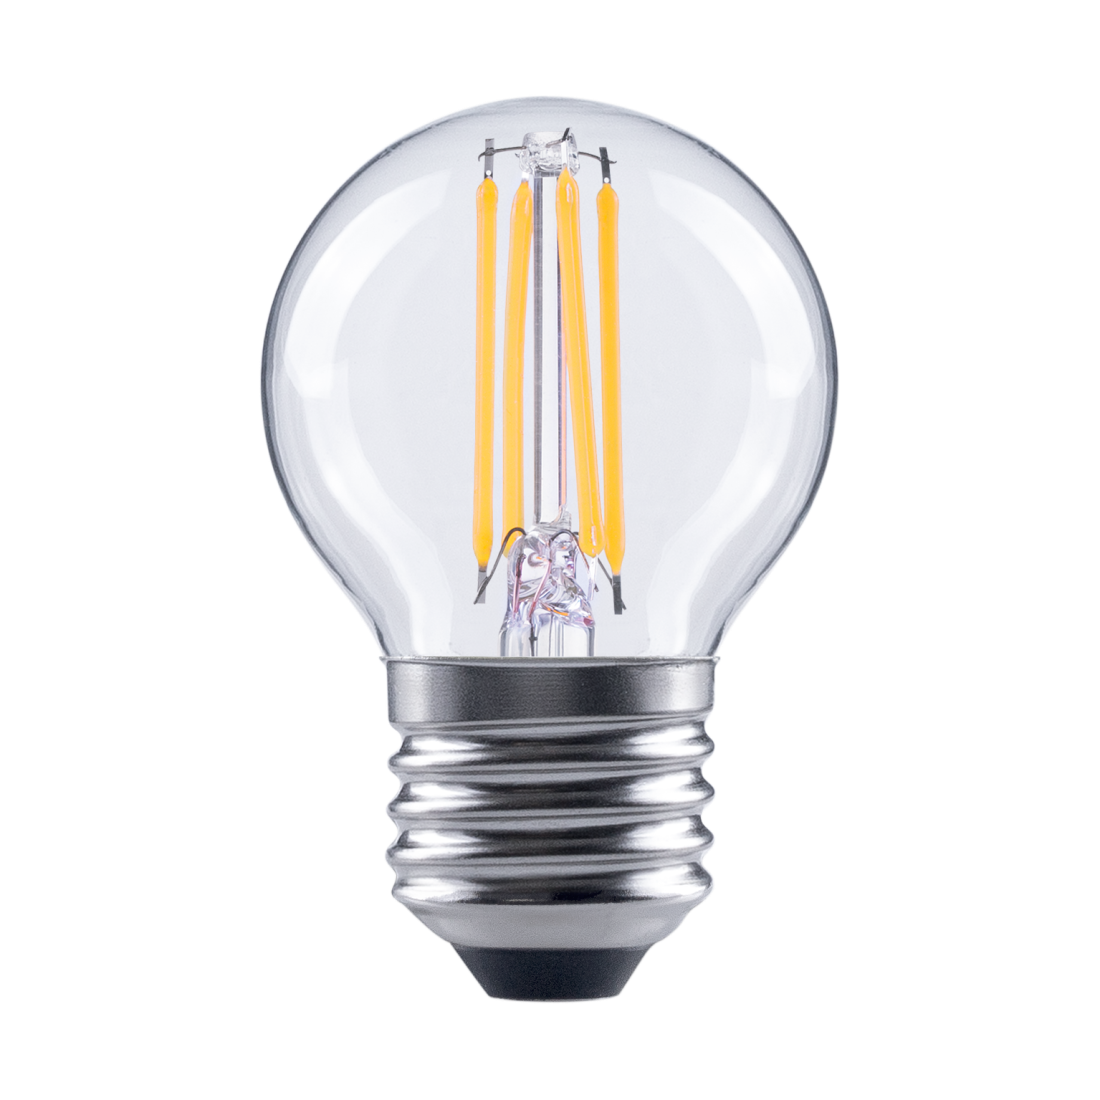 abx High-Res Image - Xavax, LED Filament, E27, 470 lm Replaces 40 W, Drop Bulb, warm white, clear